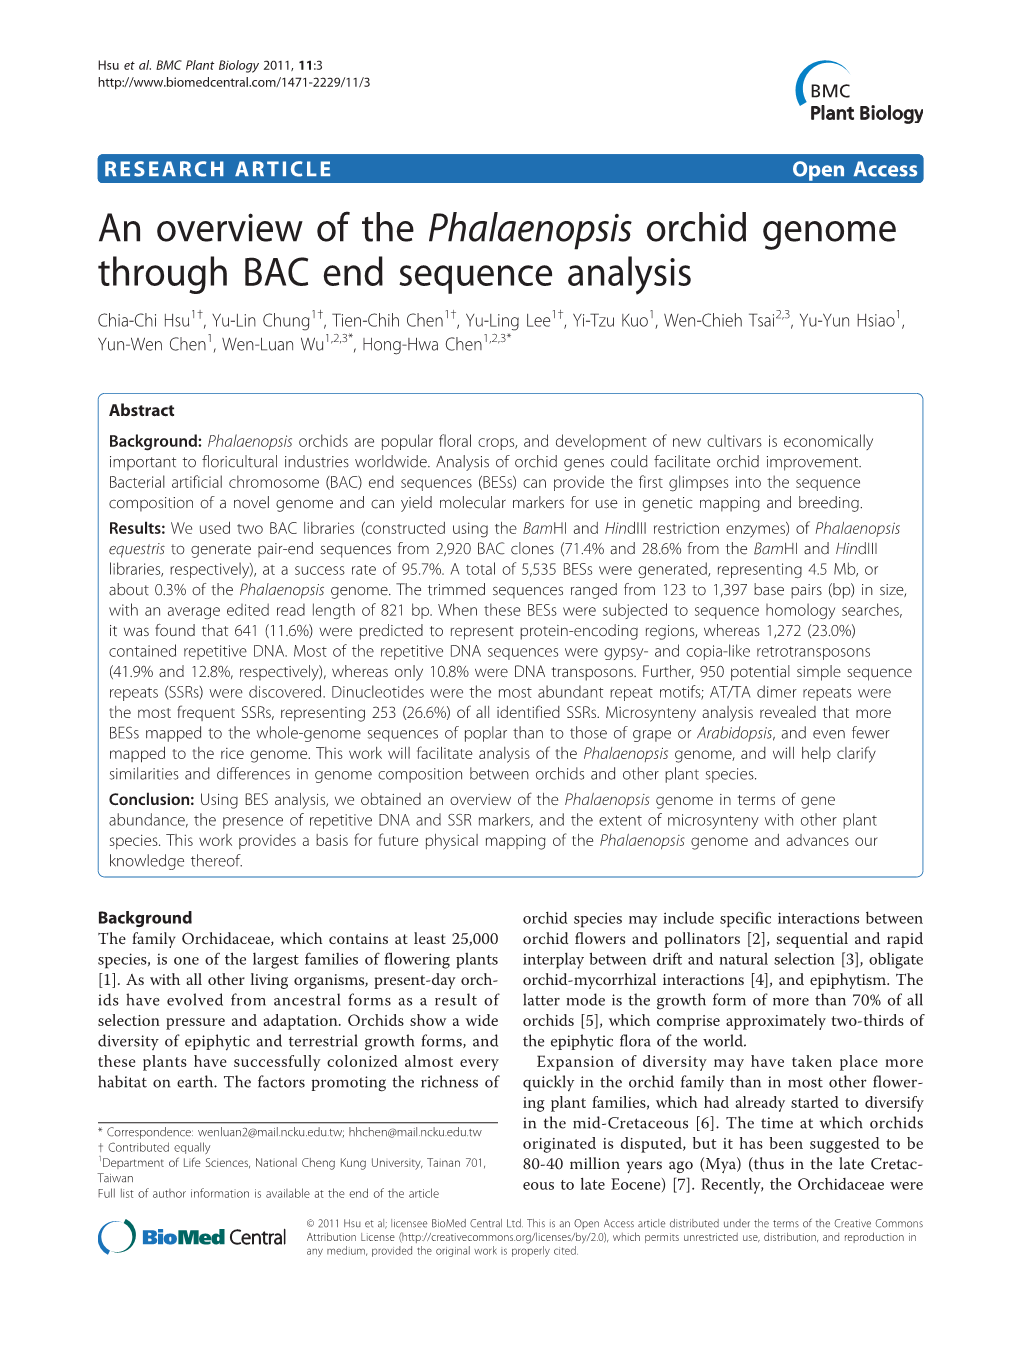 An Overview of the Phalaenopsis Orchid Genome Through BAC End